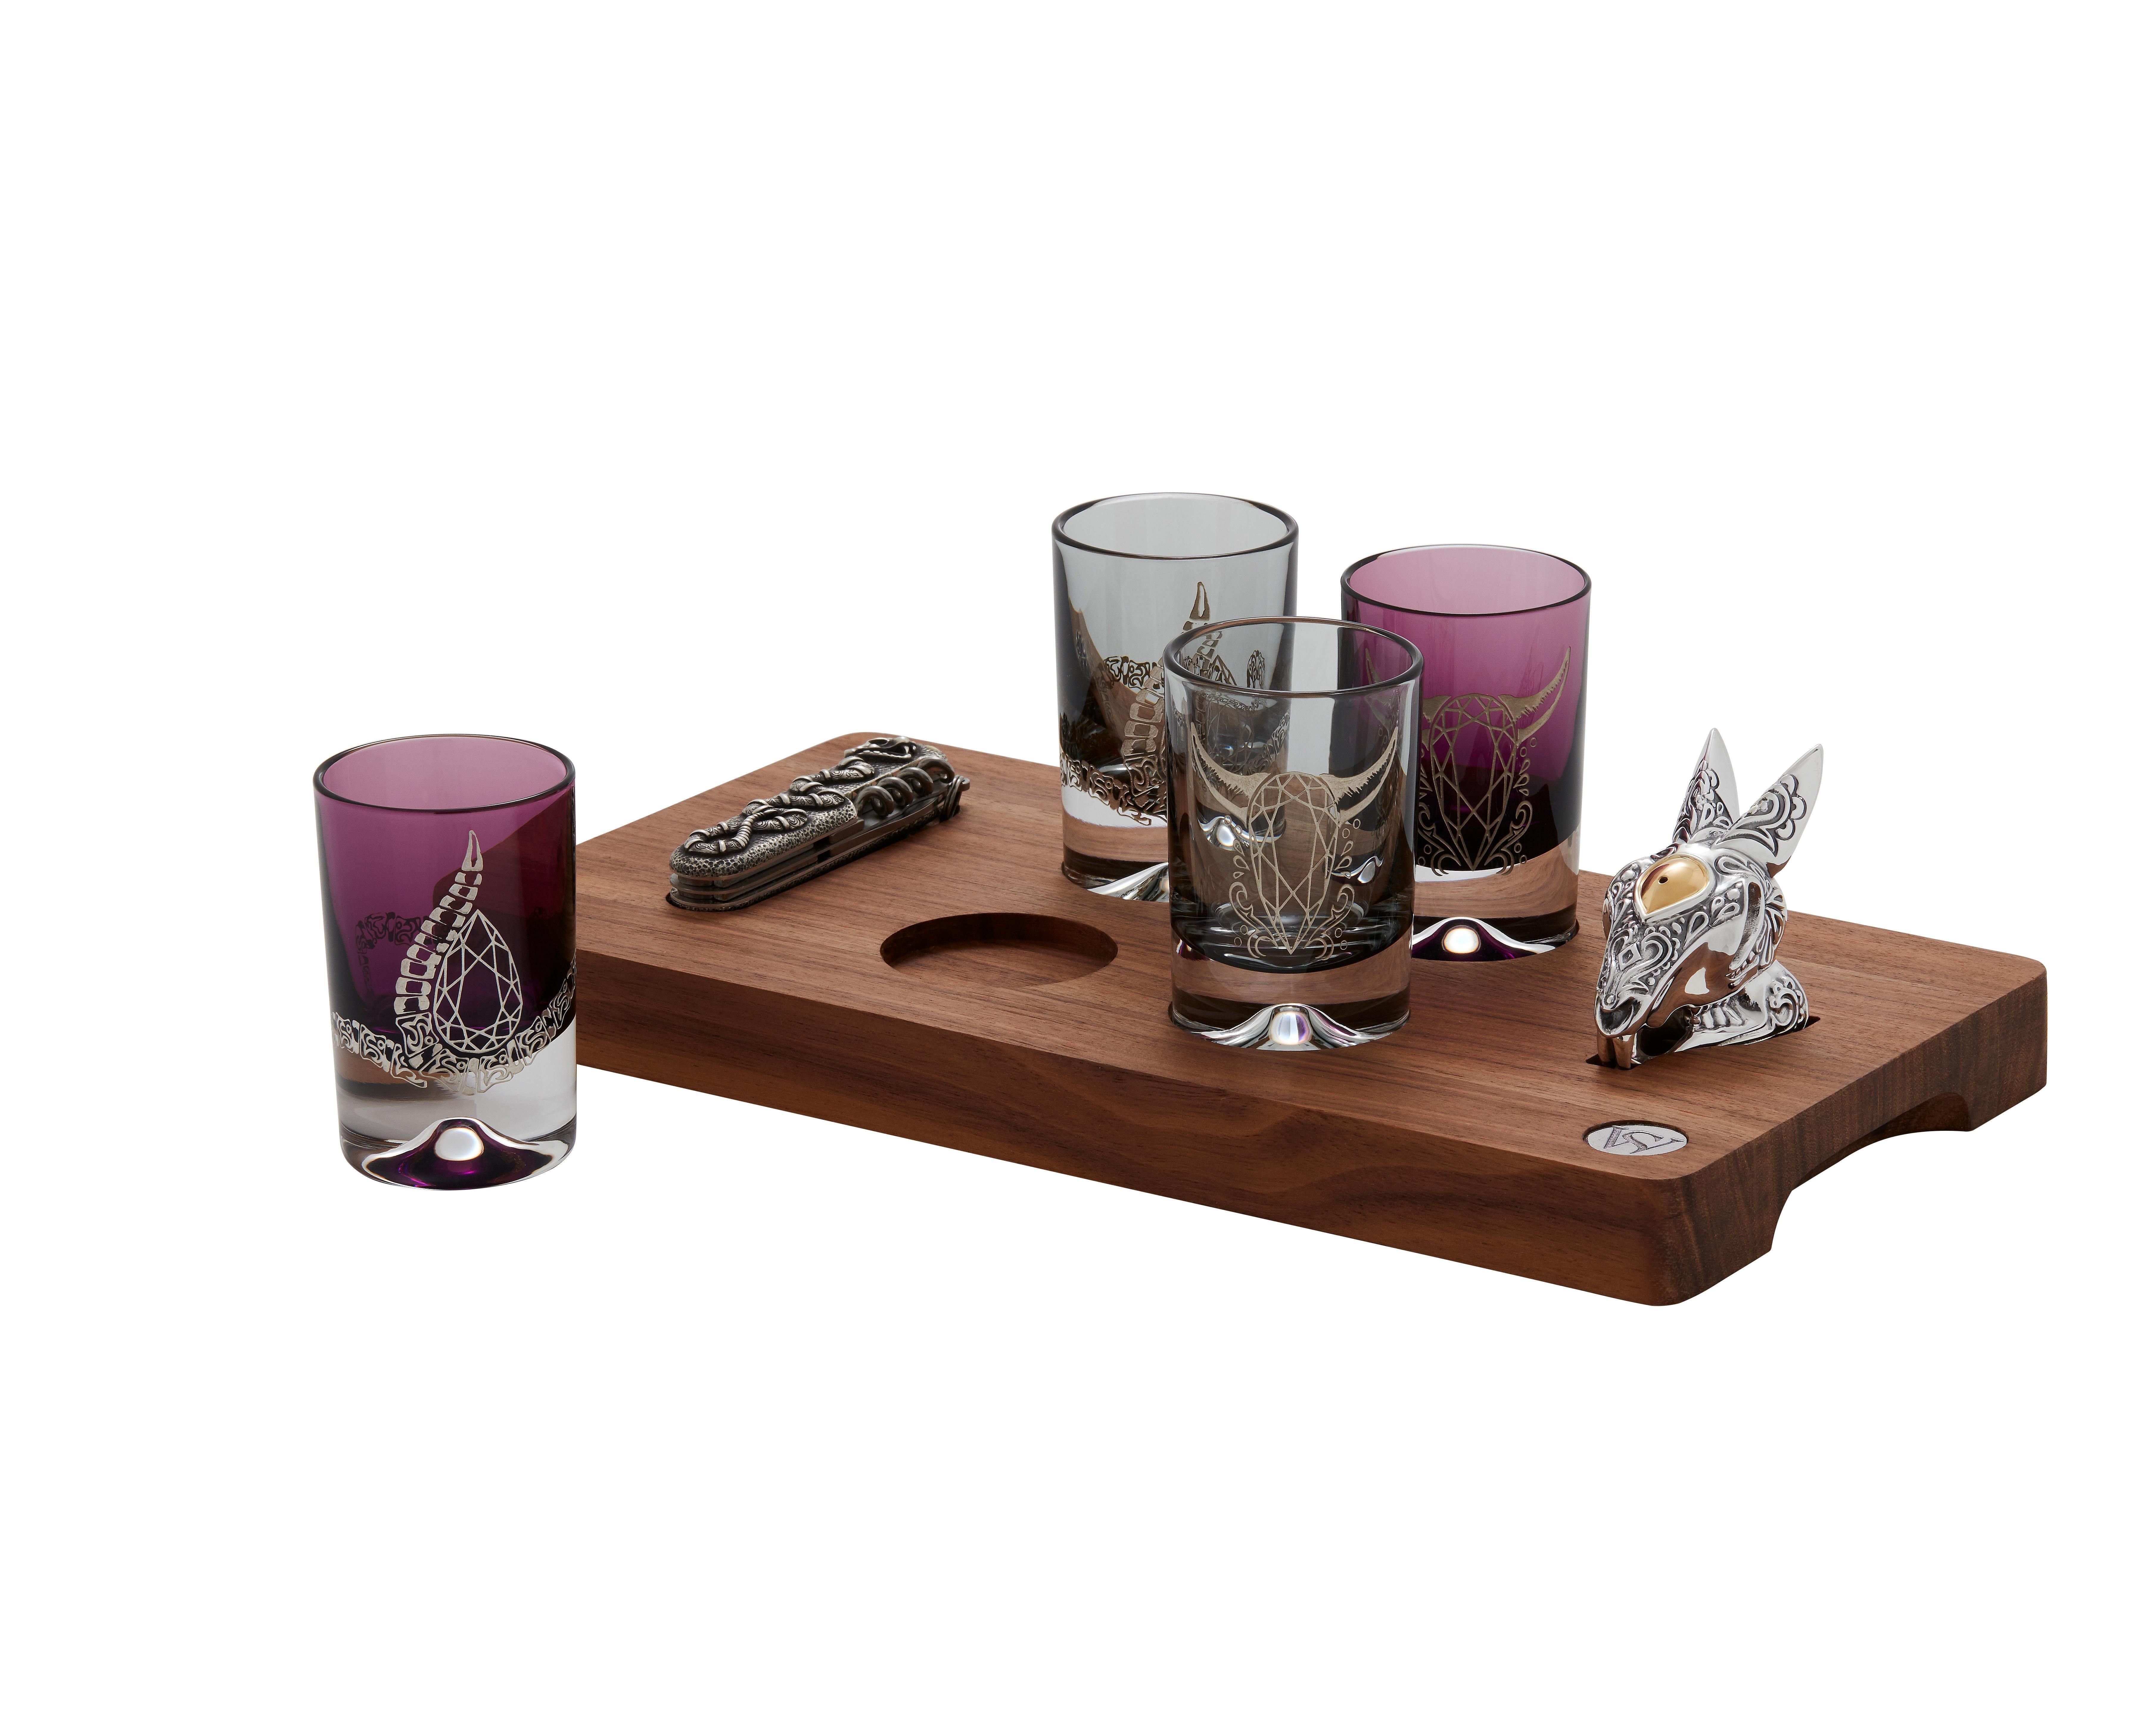 This Tequila Glass set includes:
1 x Tequila cow shot glass - Smoke coloured glass with engraved cow detail
1 x Tequila cow shot glass - Amethyst coloured glass with engraved cow detail
1 x Tequila rattlesnake shot hlass - Smoke coloured glass with